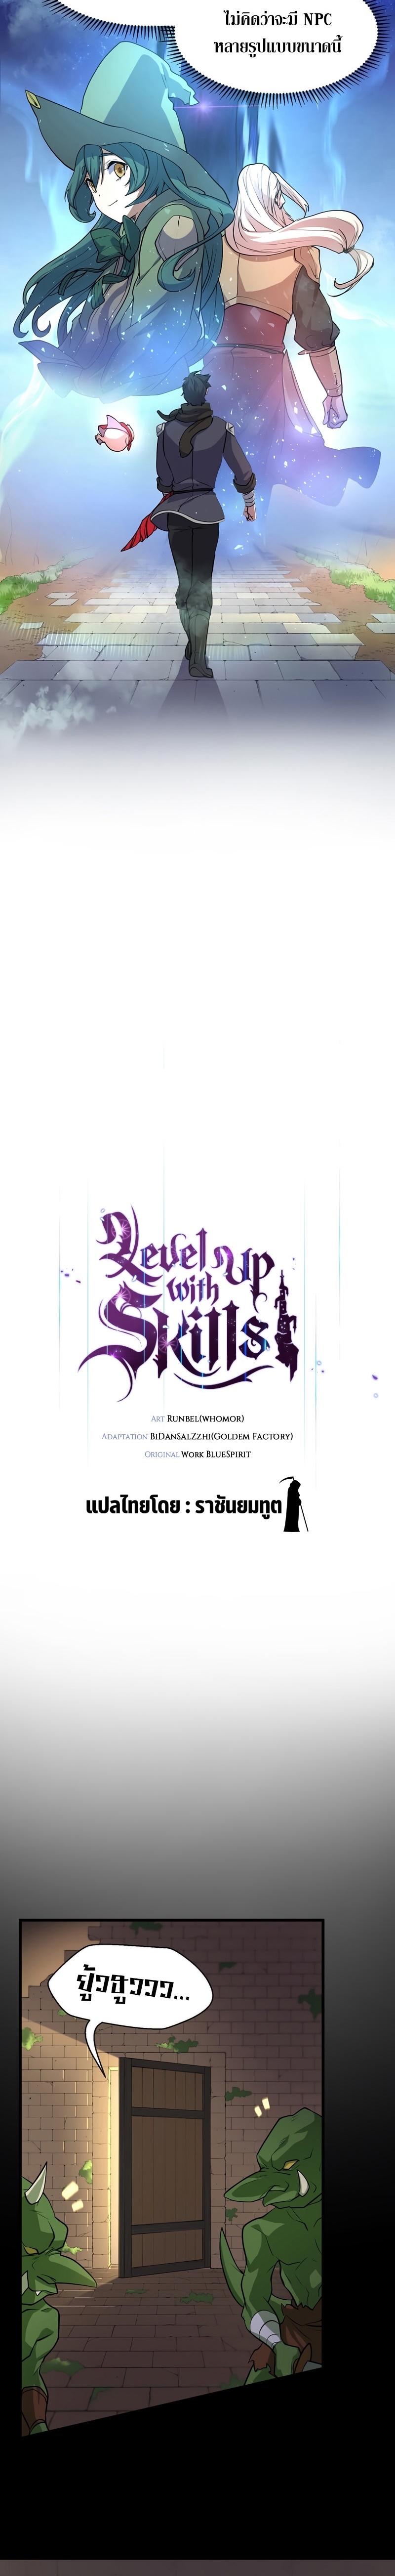 level up with skills 28.04